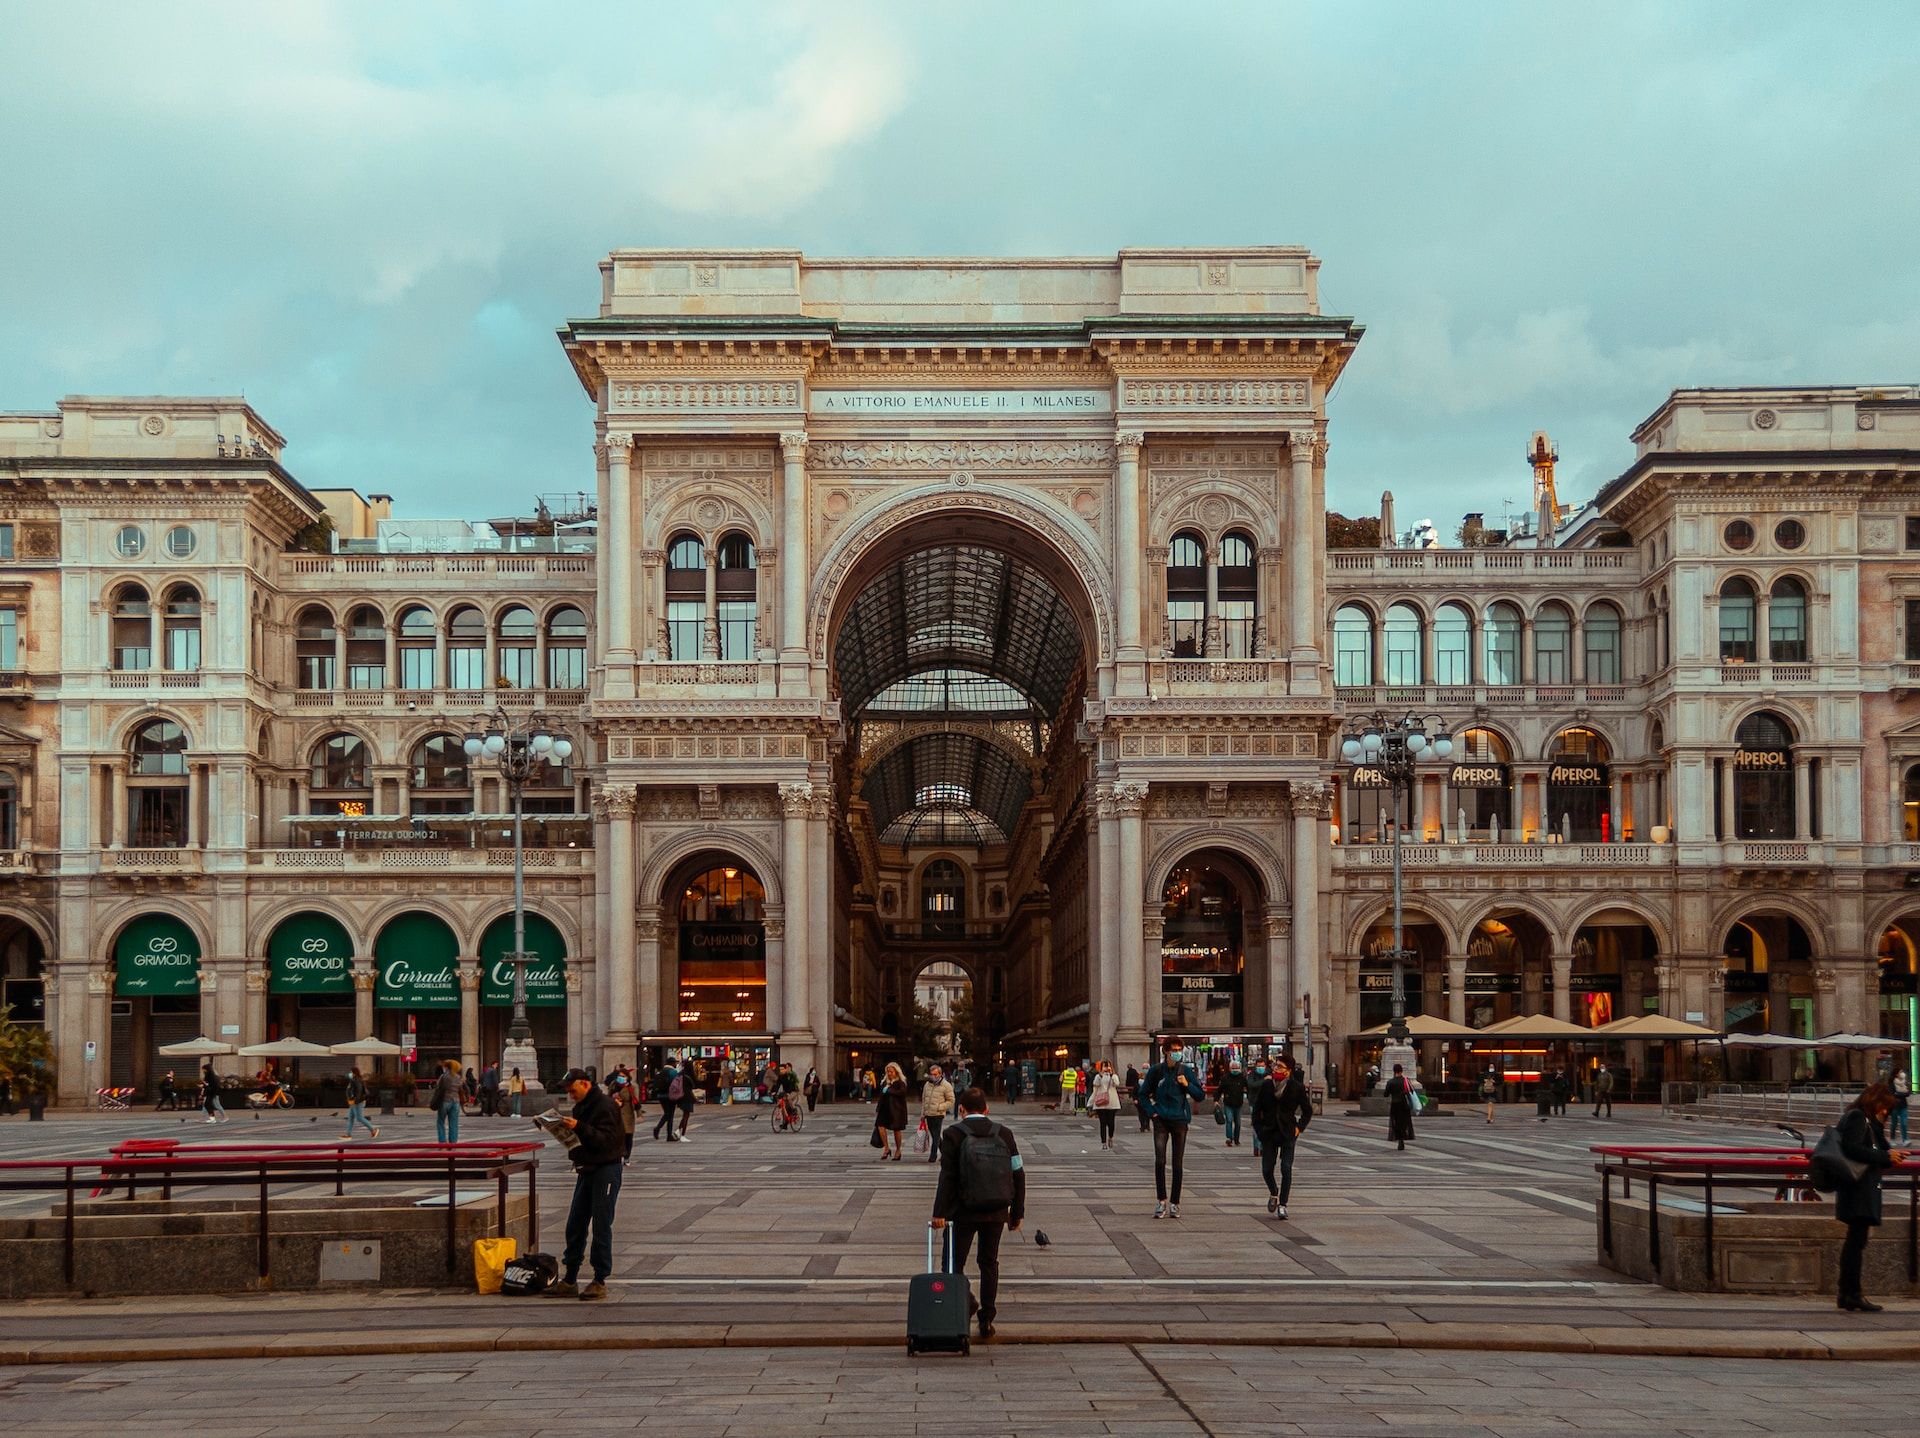 View of the front of the Galleria Vittorio Emanuelle II in Milan, Italy